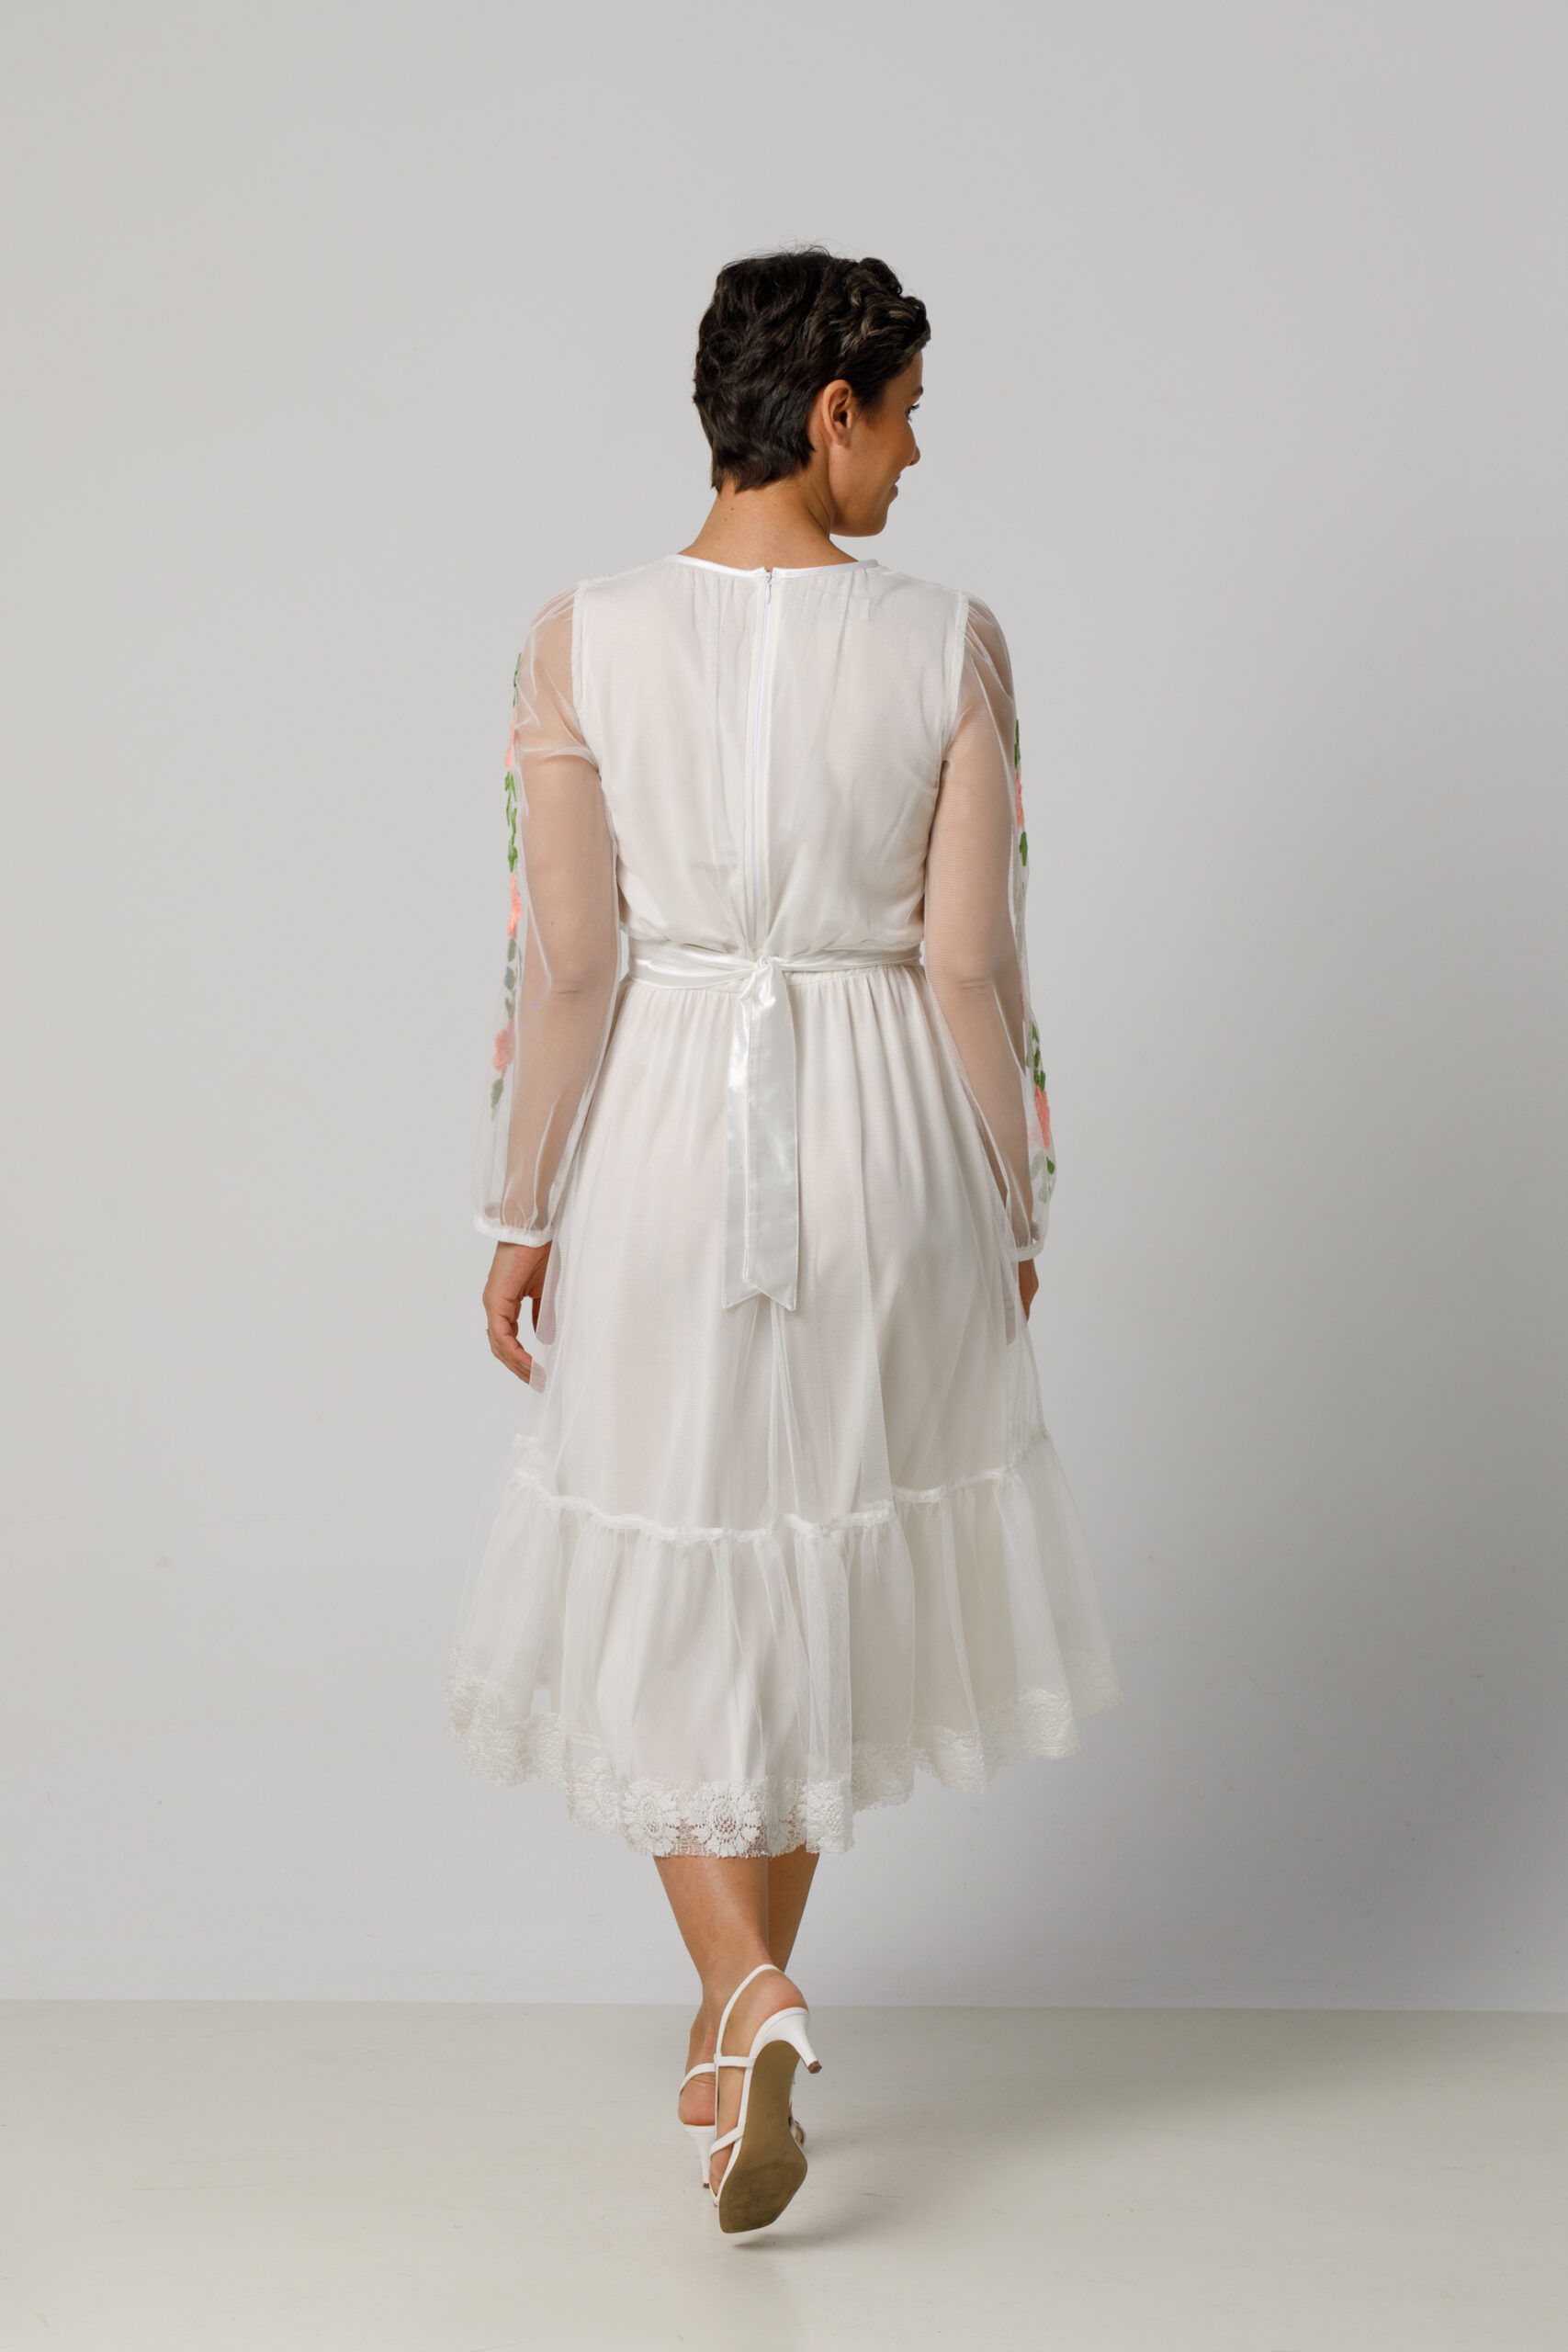 AMARIS Elegant white dress made of tulle and lace. Natural fabrics, original design, handmade embroidery